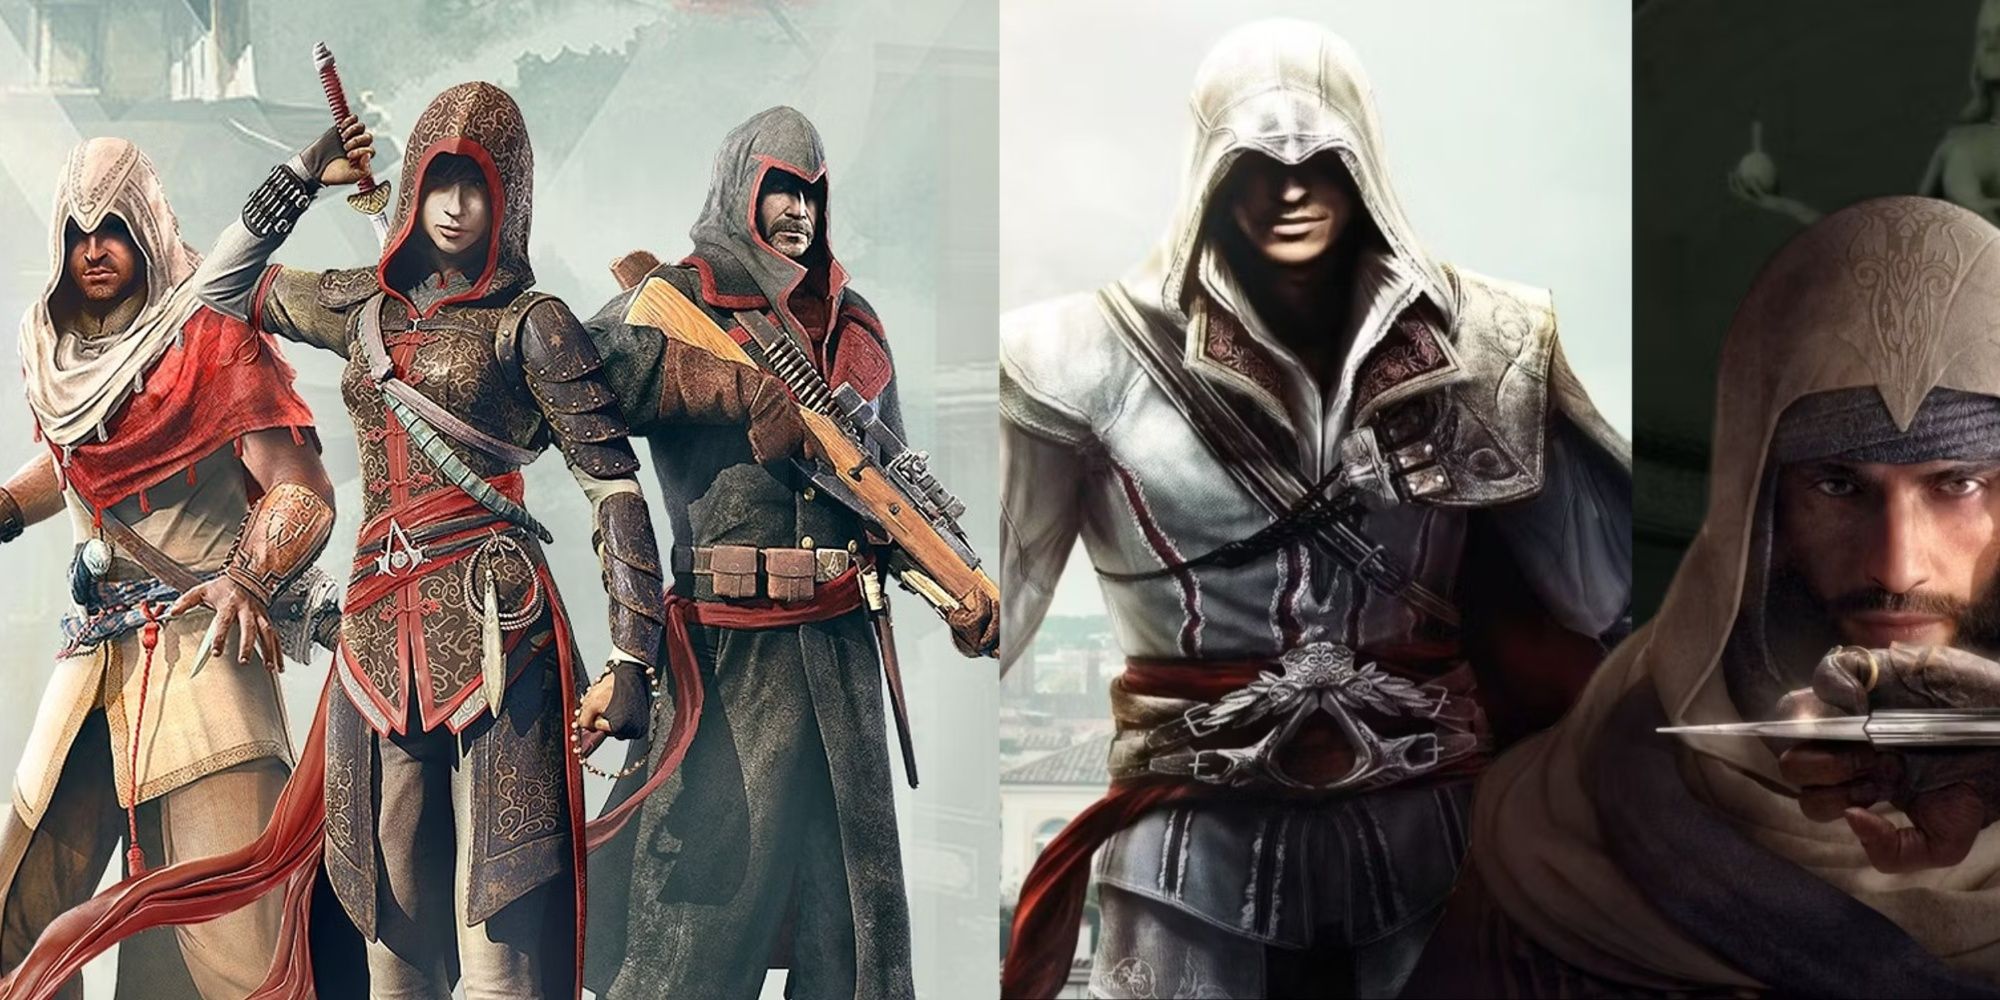 Assassin's Creed Many Protagnists including Arbaaz Mir, Shao Jun, and Nikolai Orelov from the Chronicles games, and Ezio and Basim from Assassin's Creed 2 and Mirage respectively, left to right